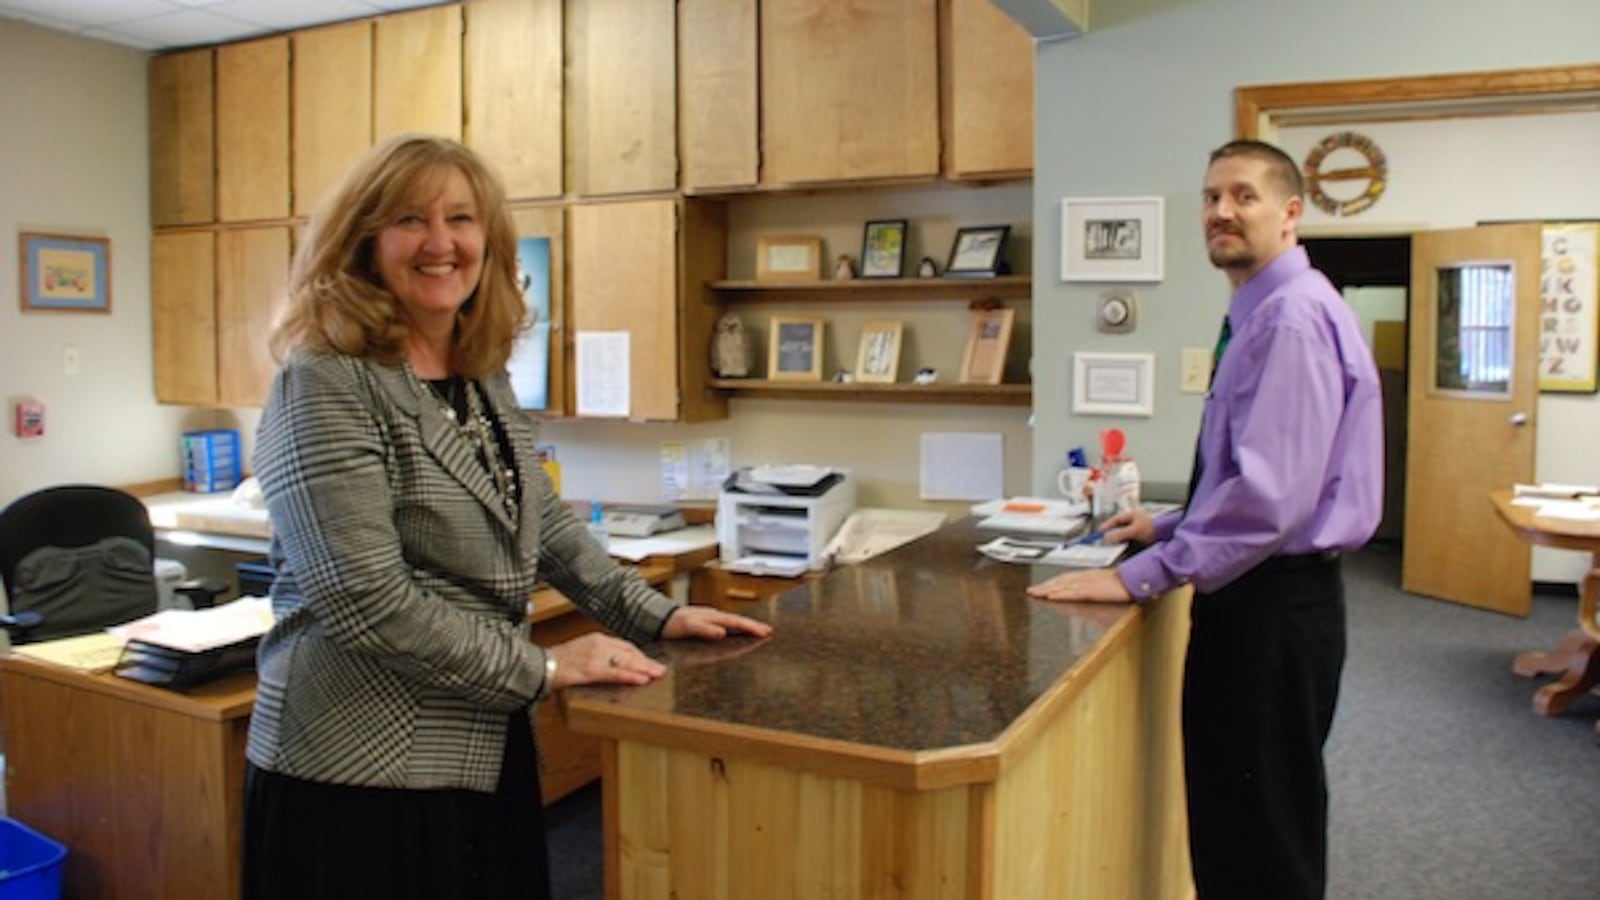 Lauren Kelso, Mountain Valley's principal, and Corey Doss, the  superintendent, in the district's main office.